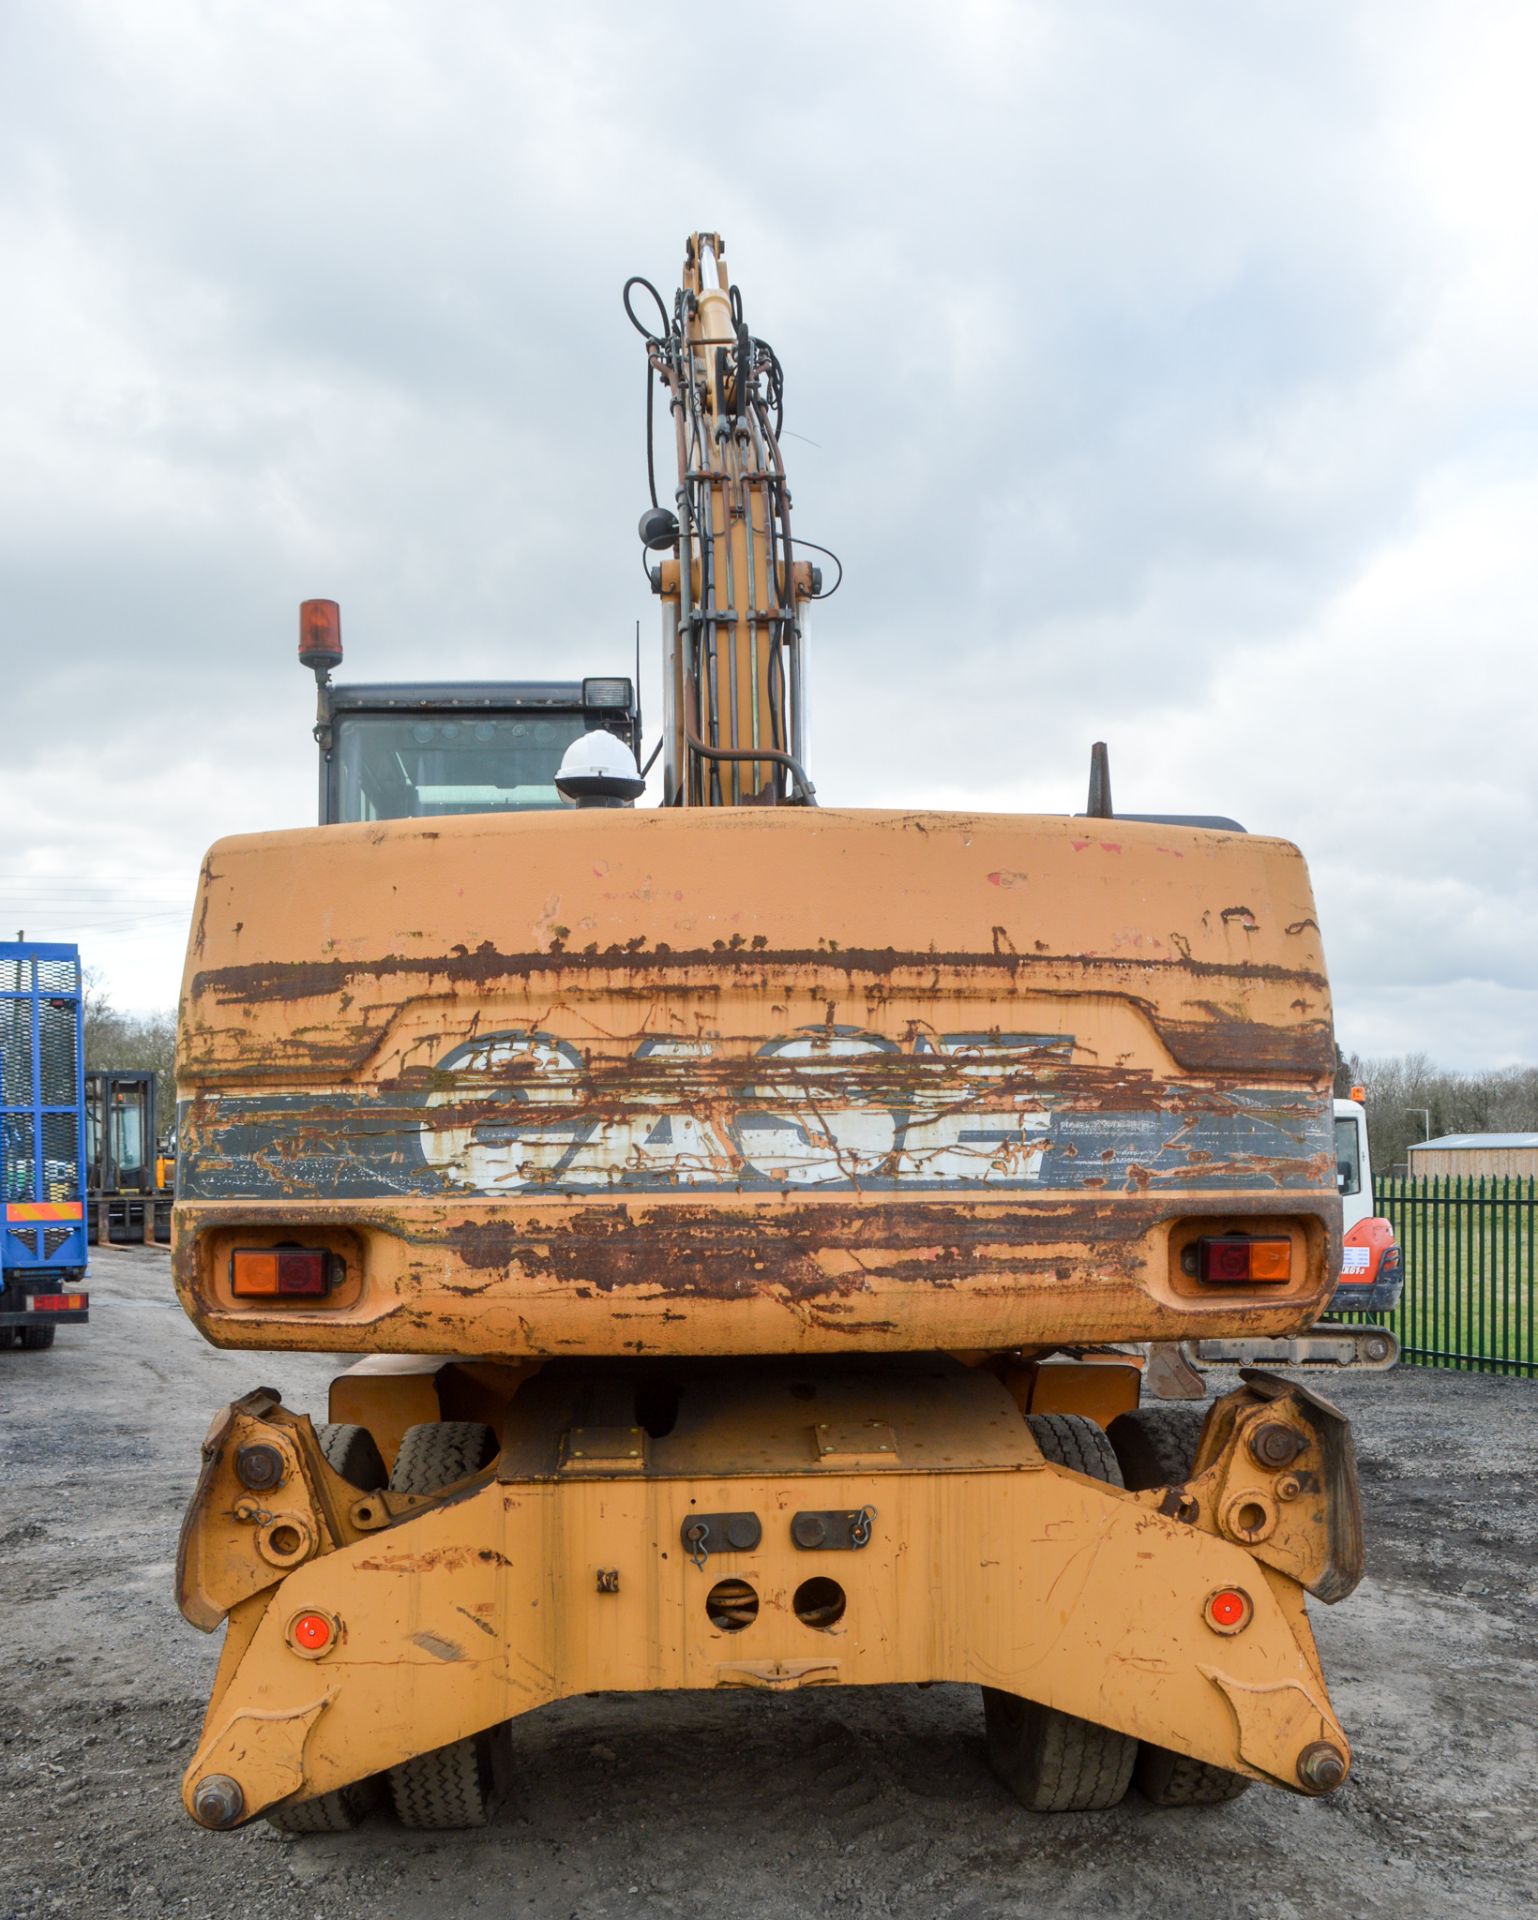 Case W170 17 tonne wheeled excavator Year: 2003 S/N: 232676 Recorded Hours: 10580 blade, piped & - Image 6 of 10